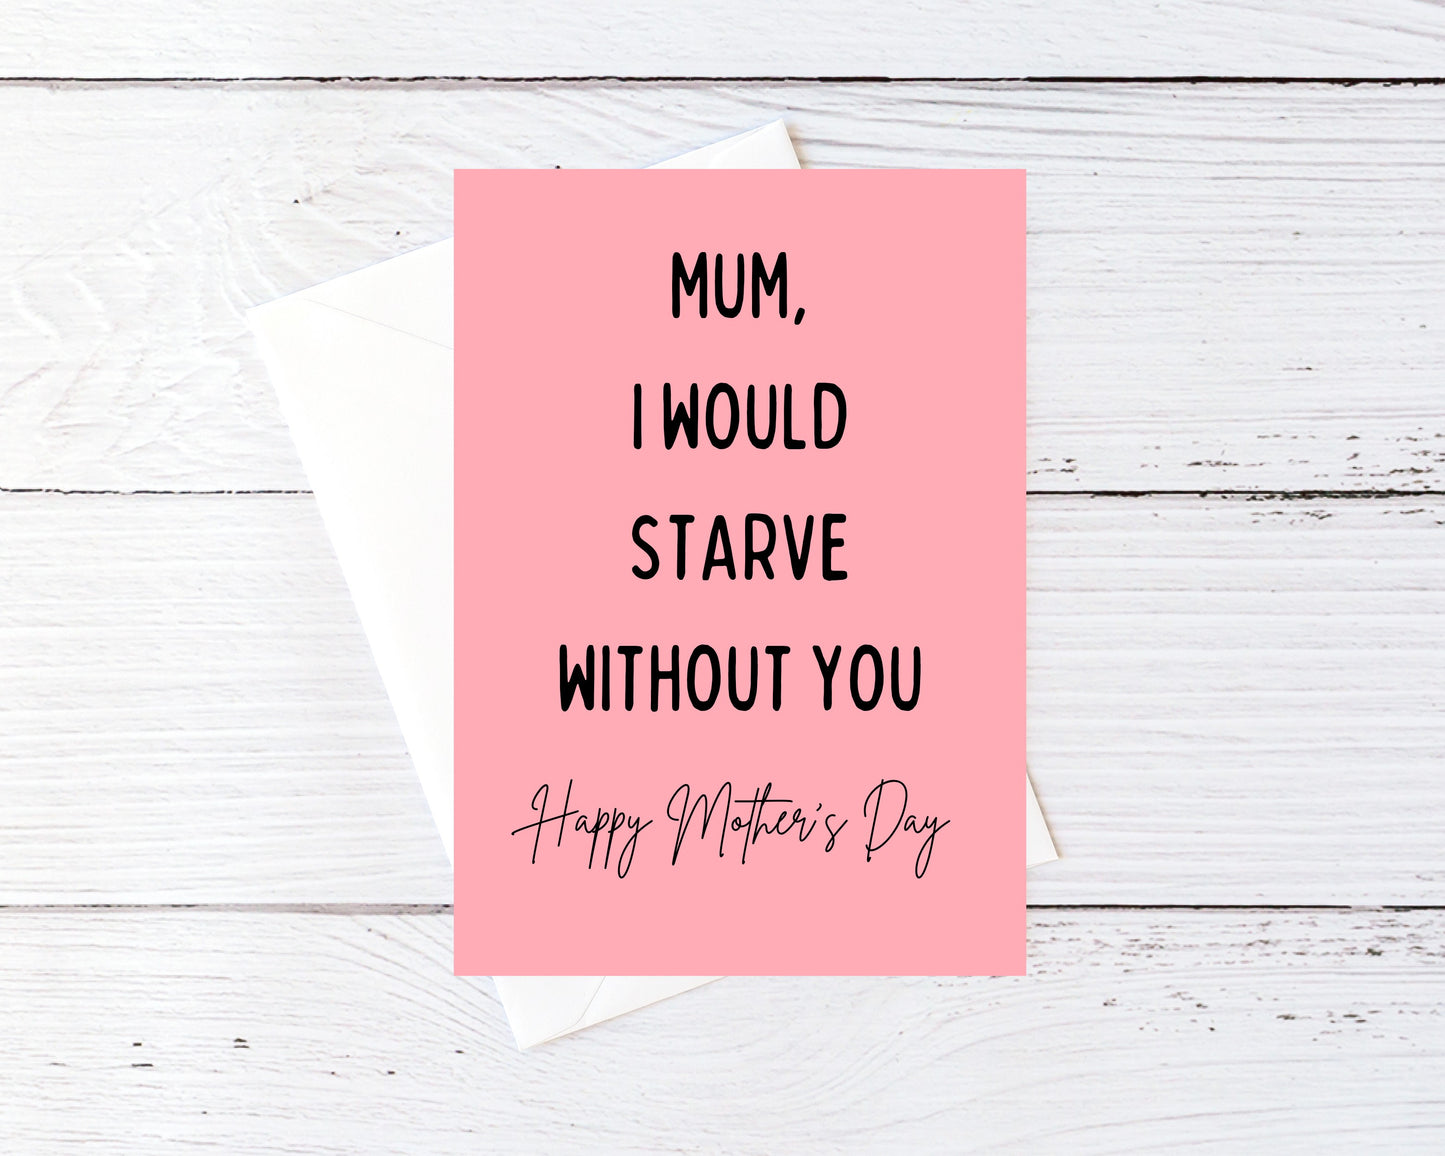 Mothers Day Card | Mum, I Would Starve Without You | Funny Mum Card | Joke Mum Card